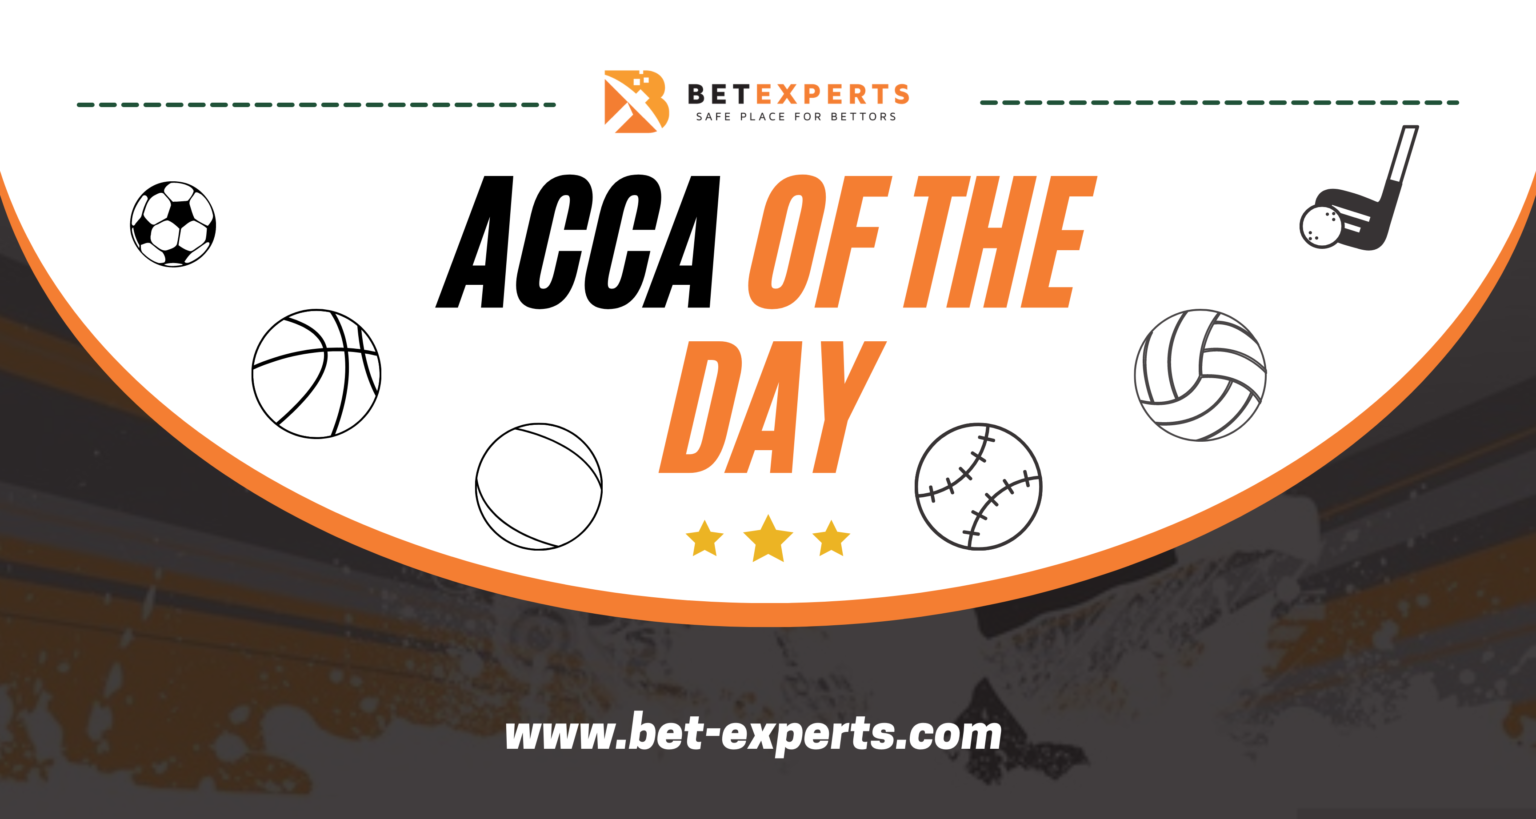 Experts' Best Bets: 6 top tipsters build 93/1 acca for Saturday!